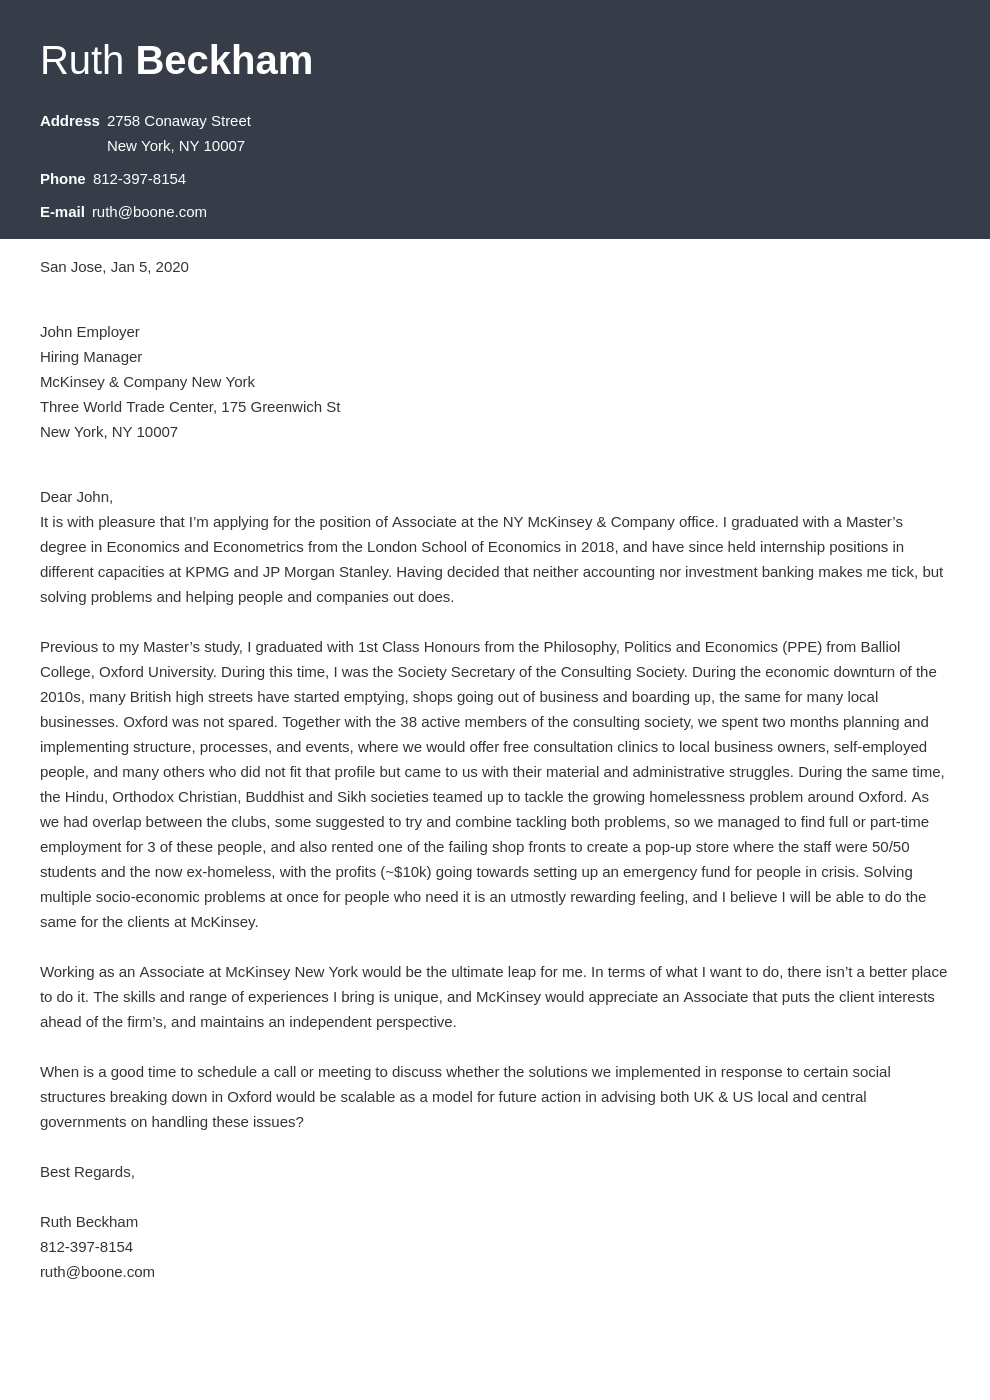 McKinsey Cover Letter Sample & Writing Tips (22+ Examples)